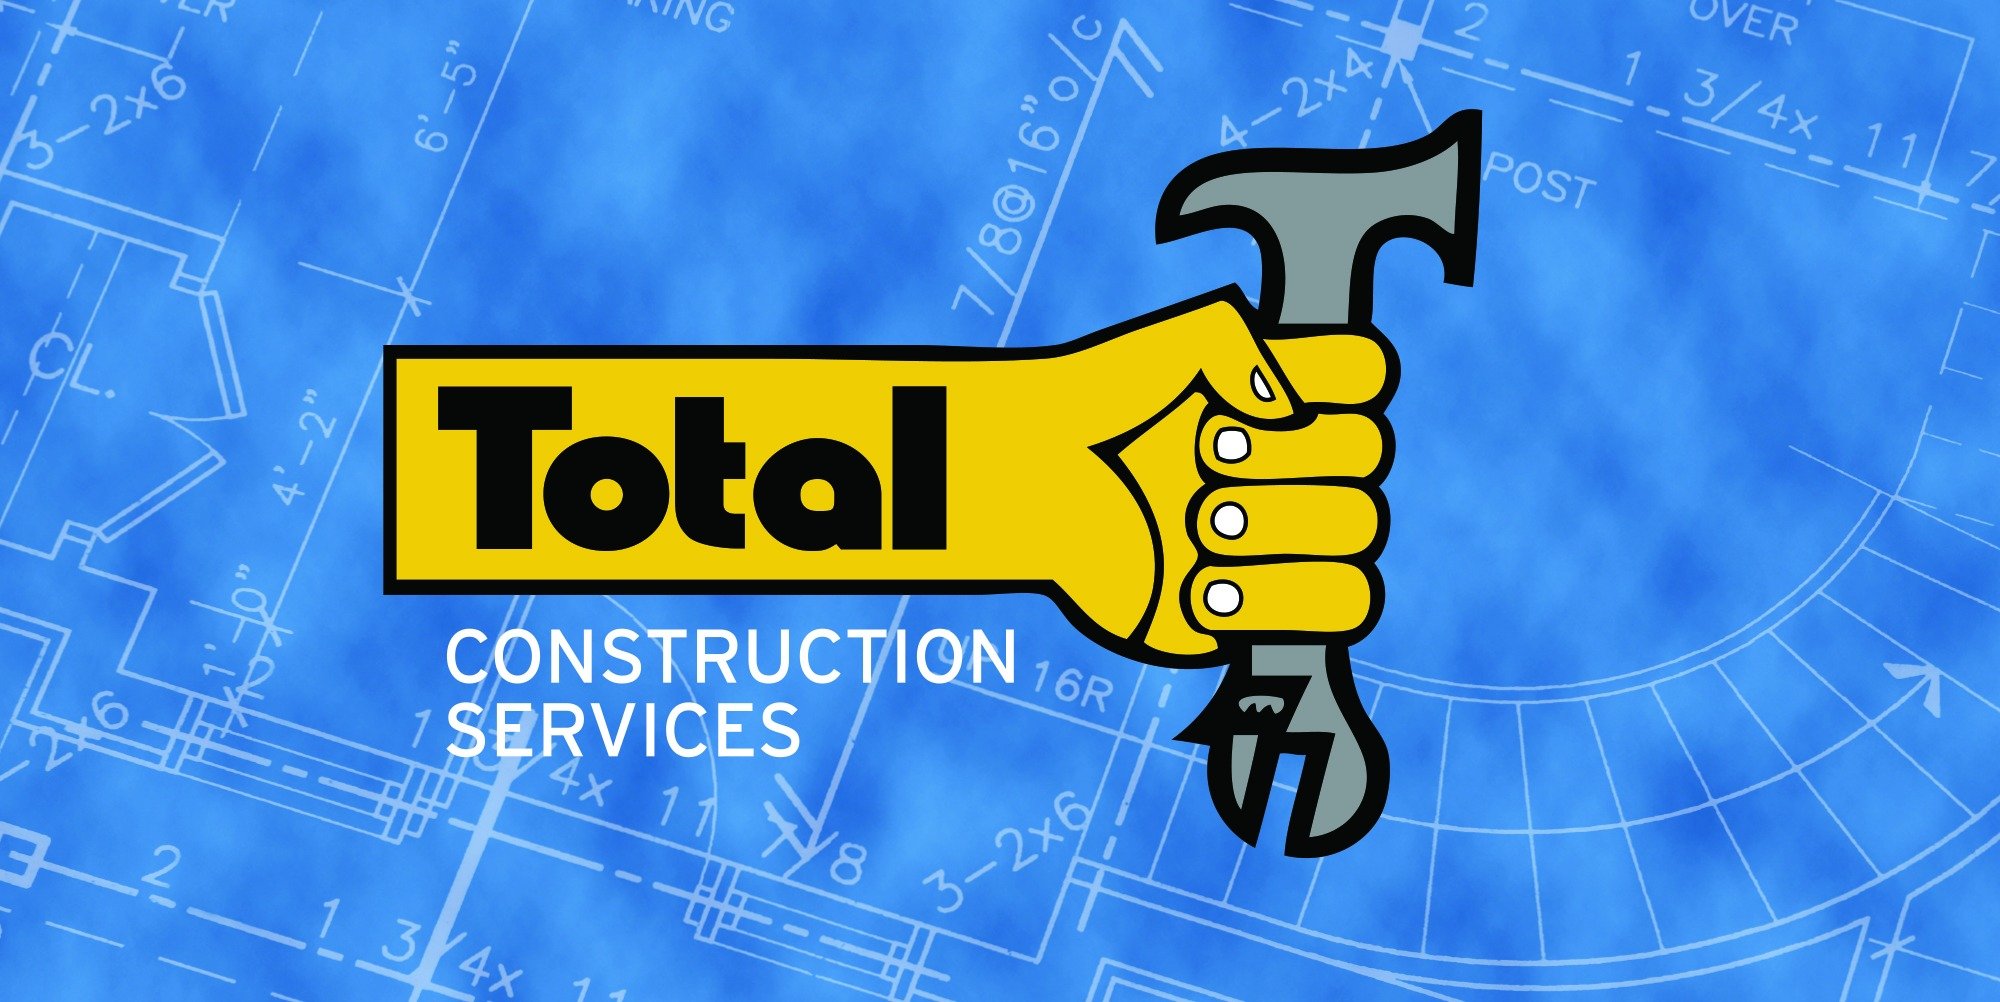 Total Construction Services inc. is a full service restoration, mitigation company. Locations in Omaha,NE, Des Monies, IA, Lincoln, NE.
(402)572-7457